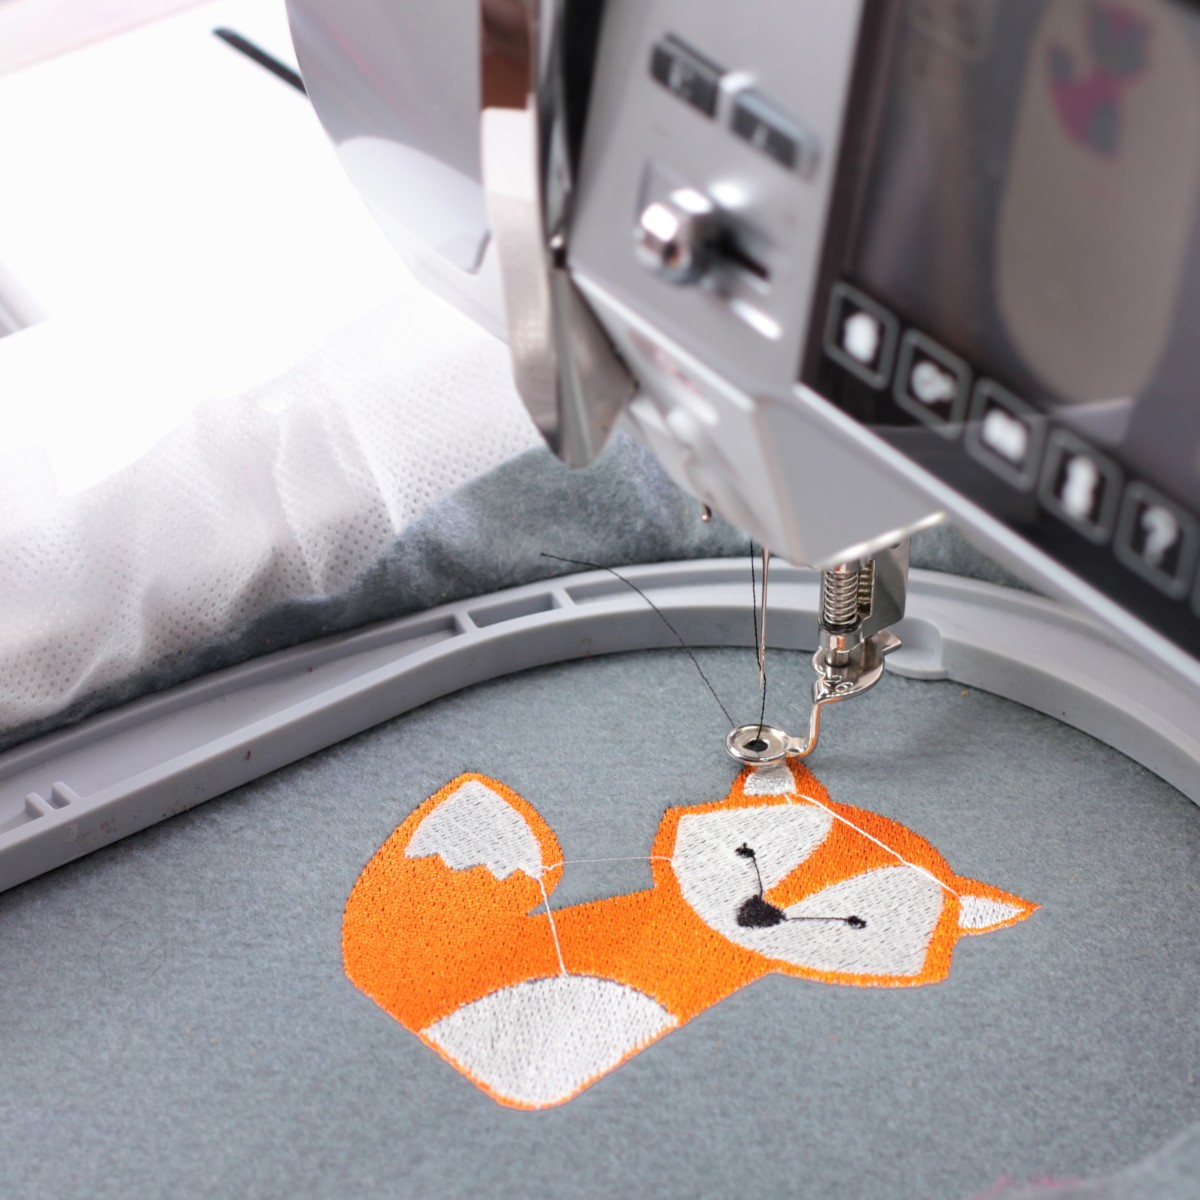 Free Machine Embroidery Patterns Brother How To Choose Machine Embroidery Thread